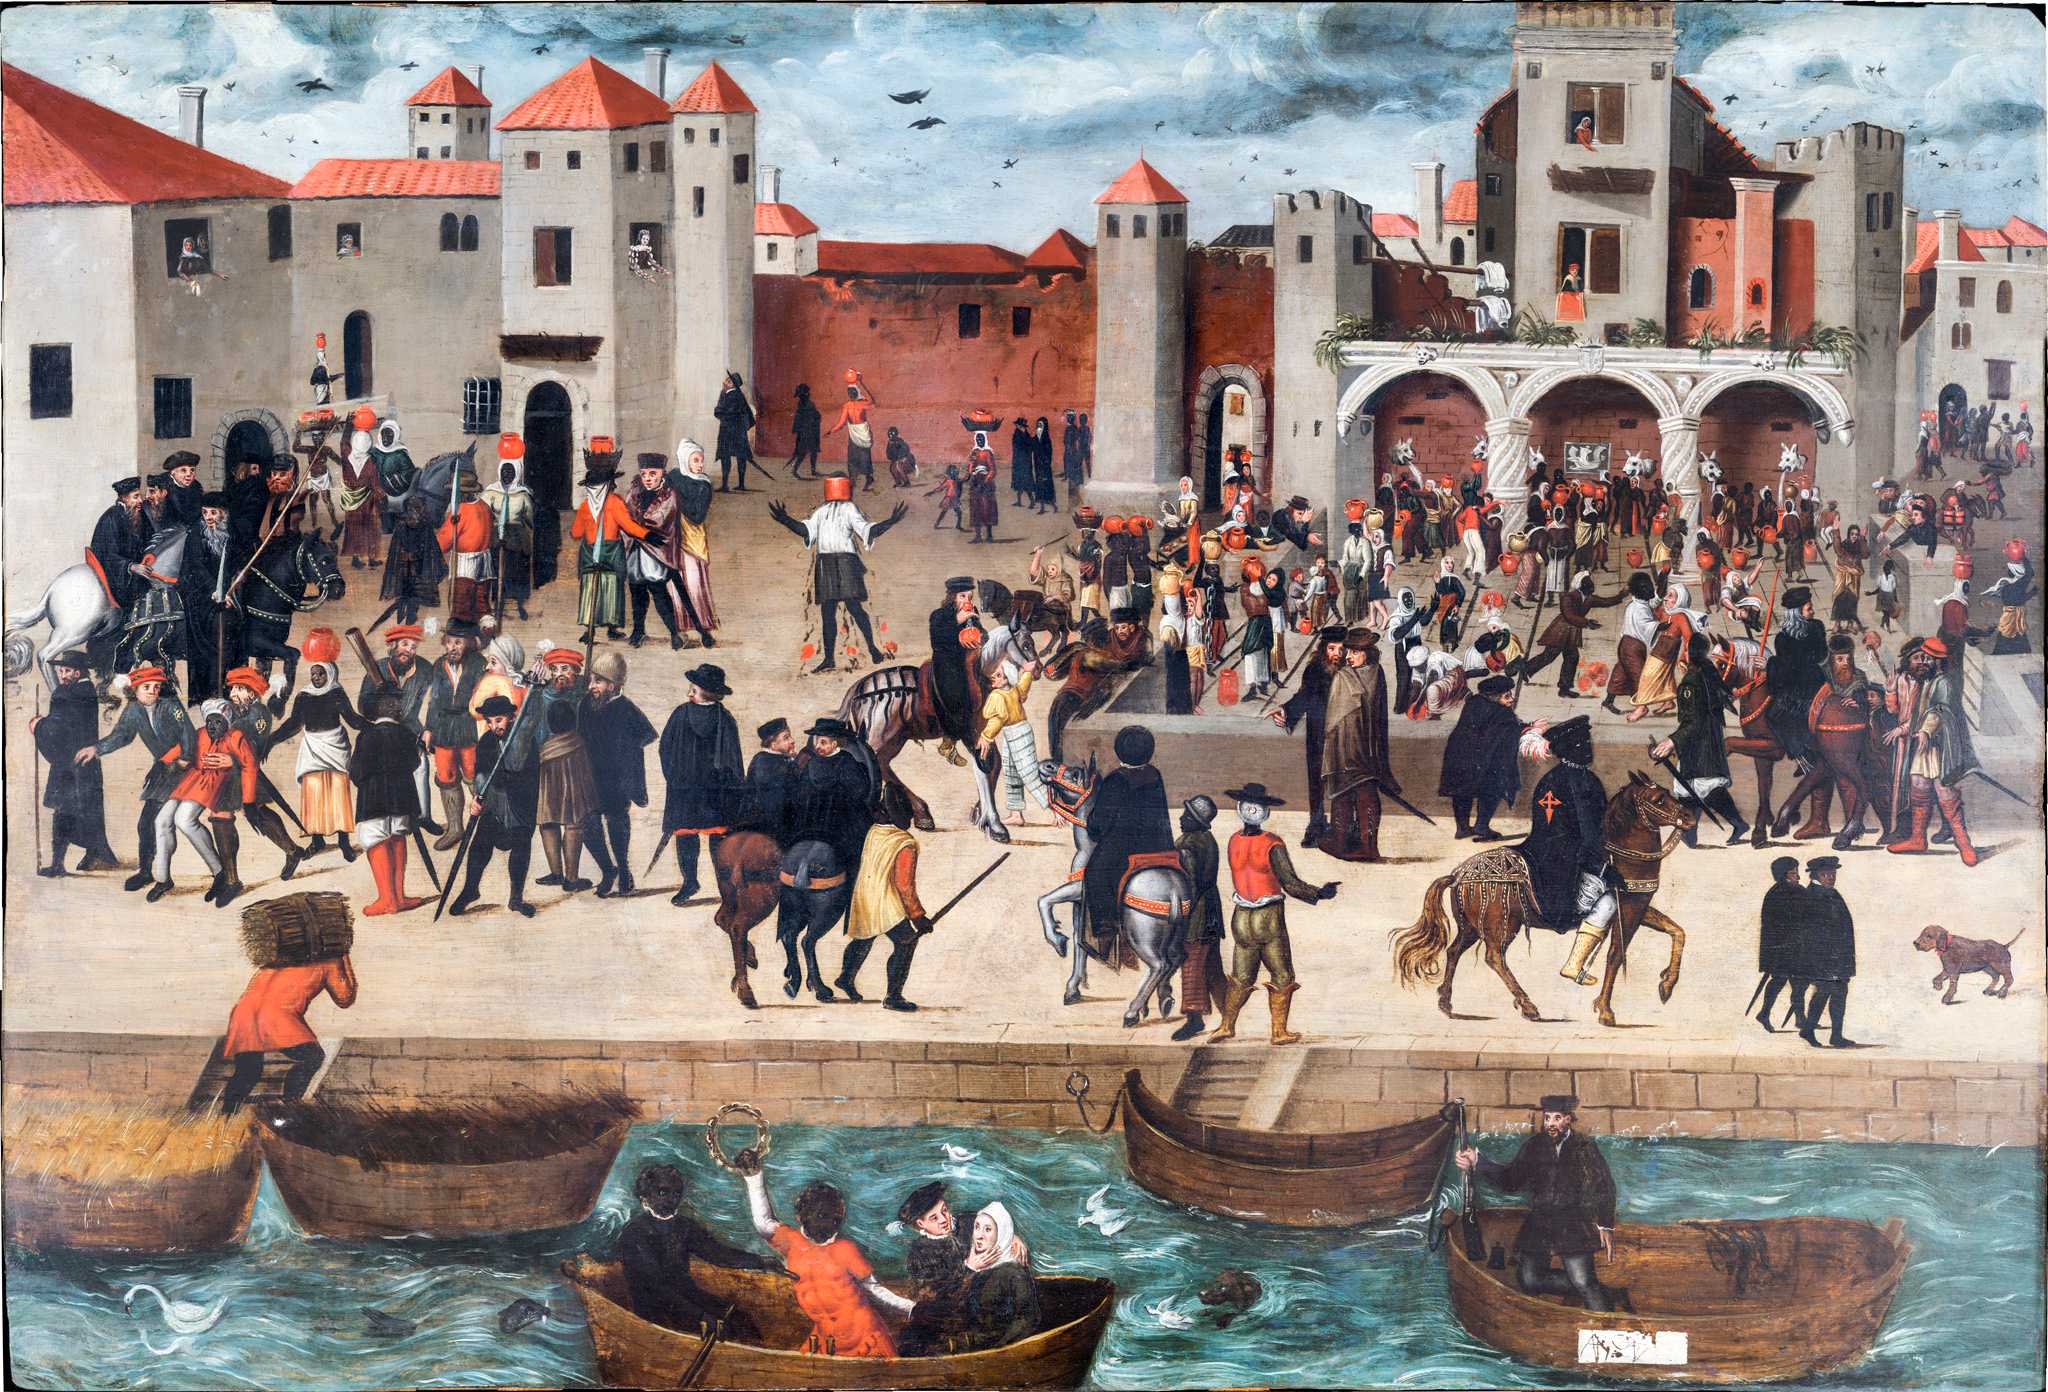 A painting of a busy Portuguese port with merchants and townspeople exchanging and walking around.